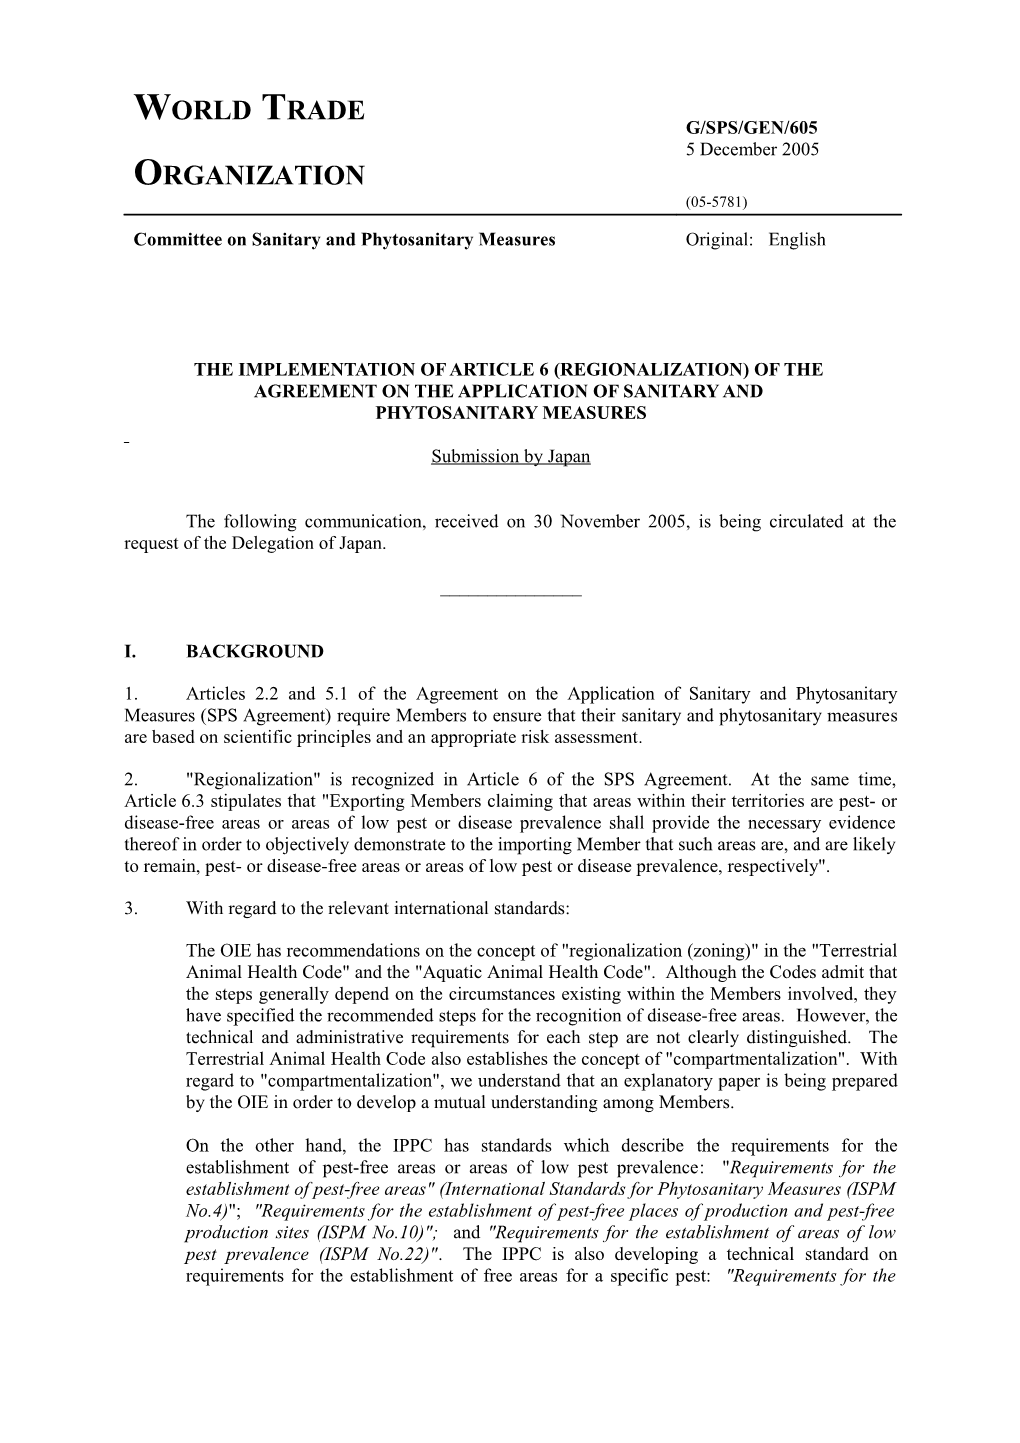 The Implementation of Article 6(REGIONALIZATION) of The